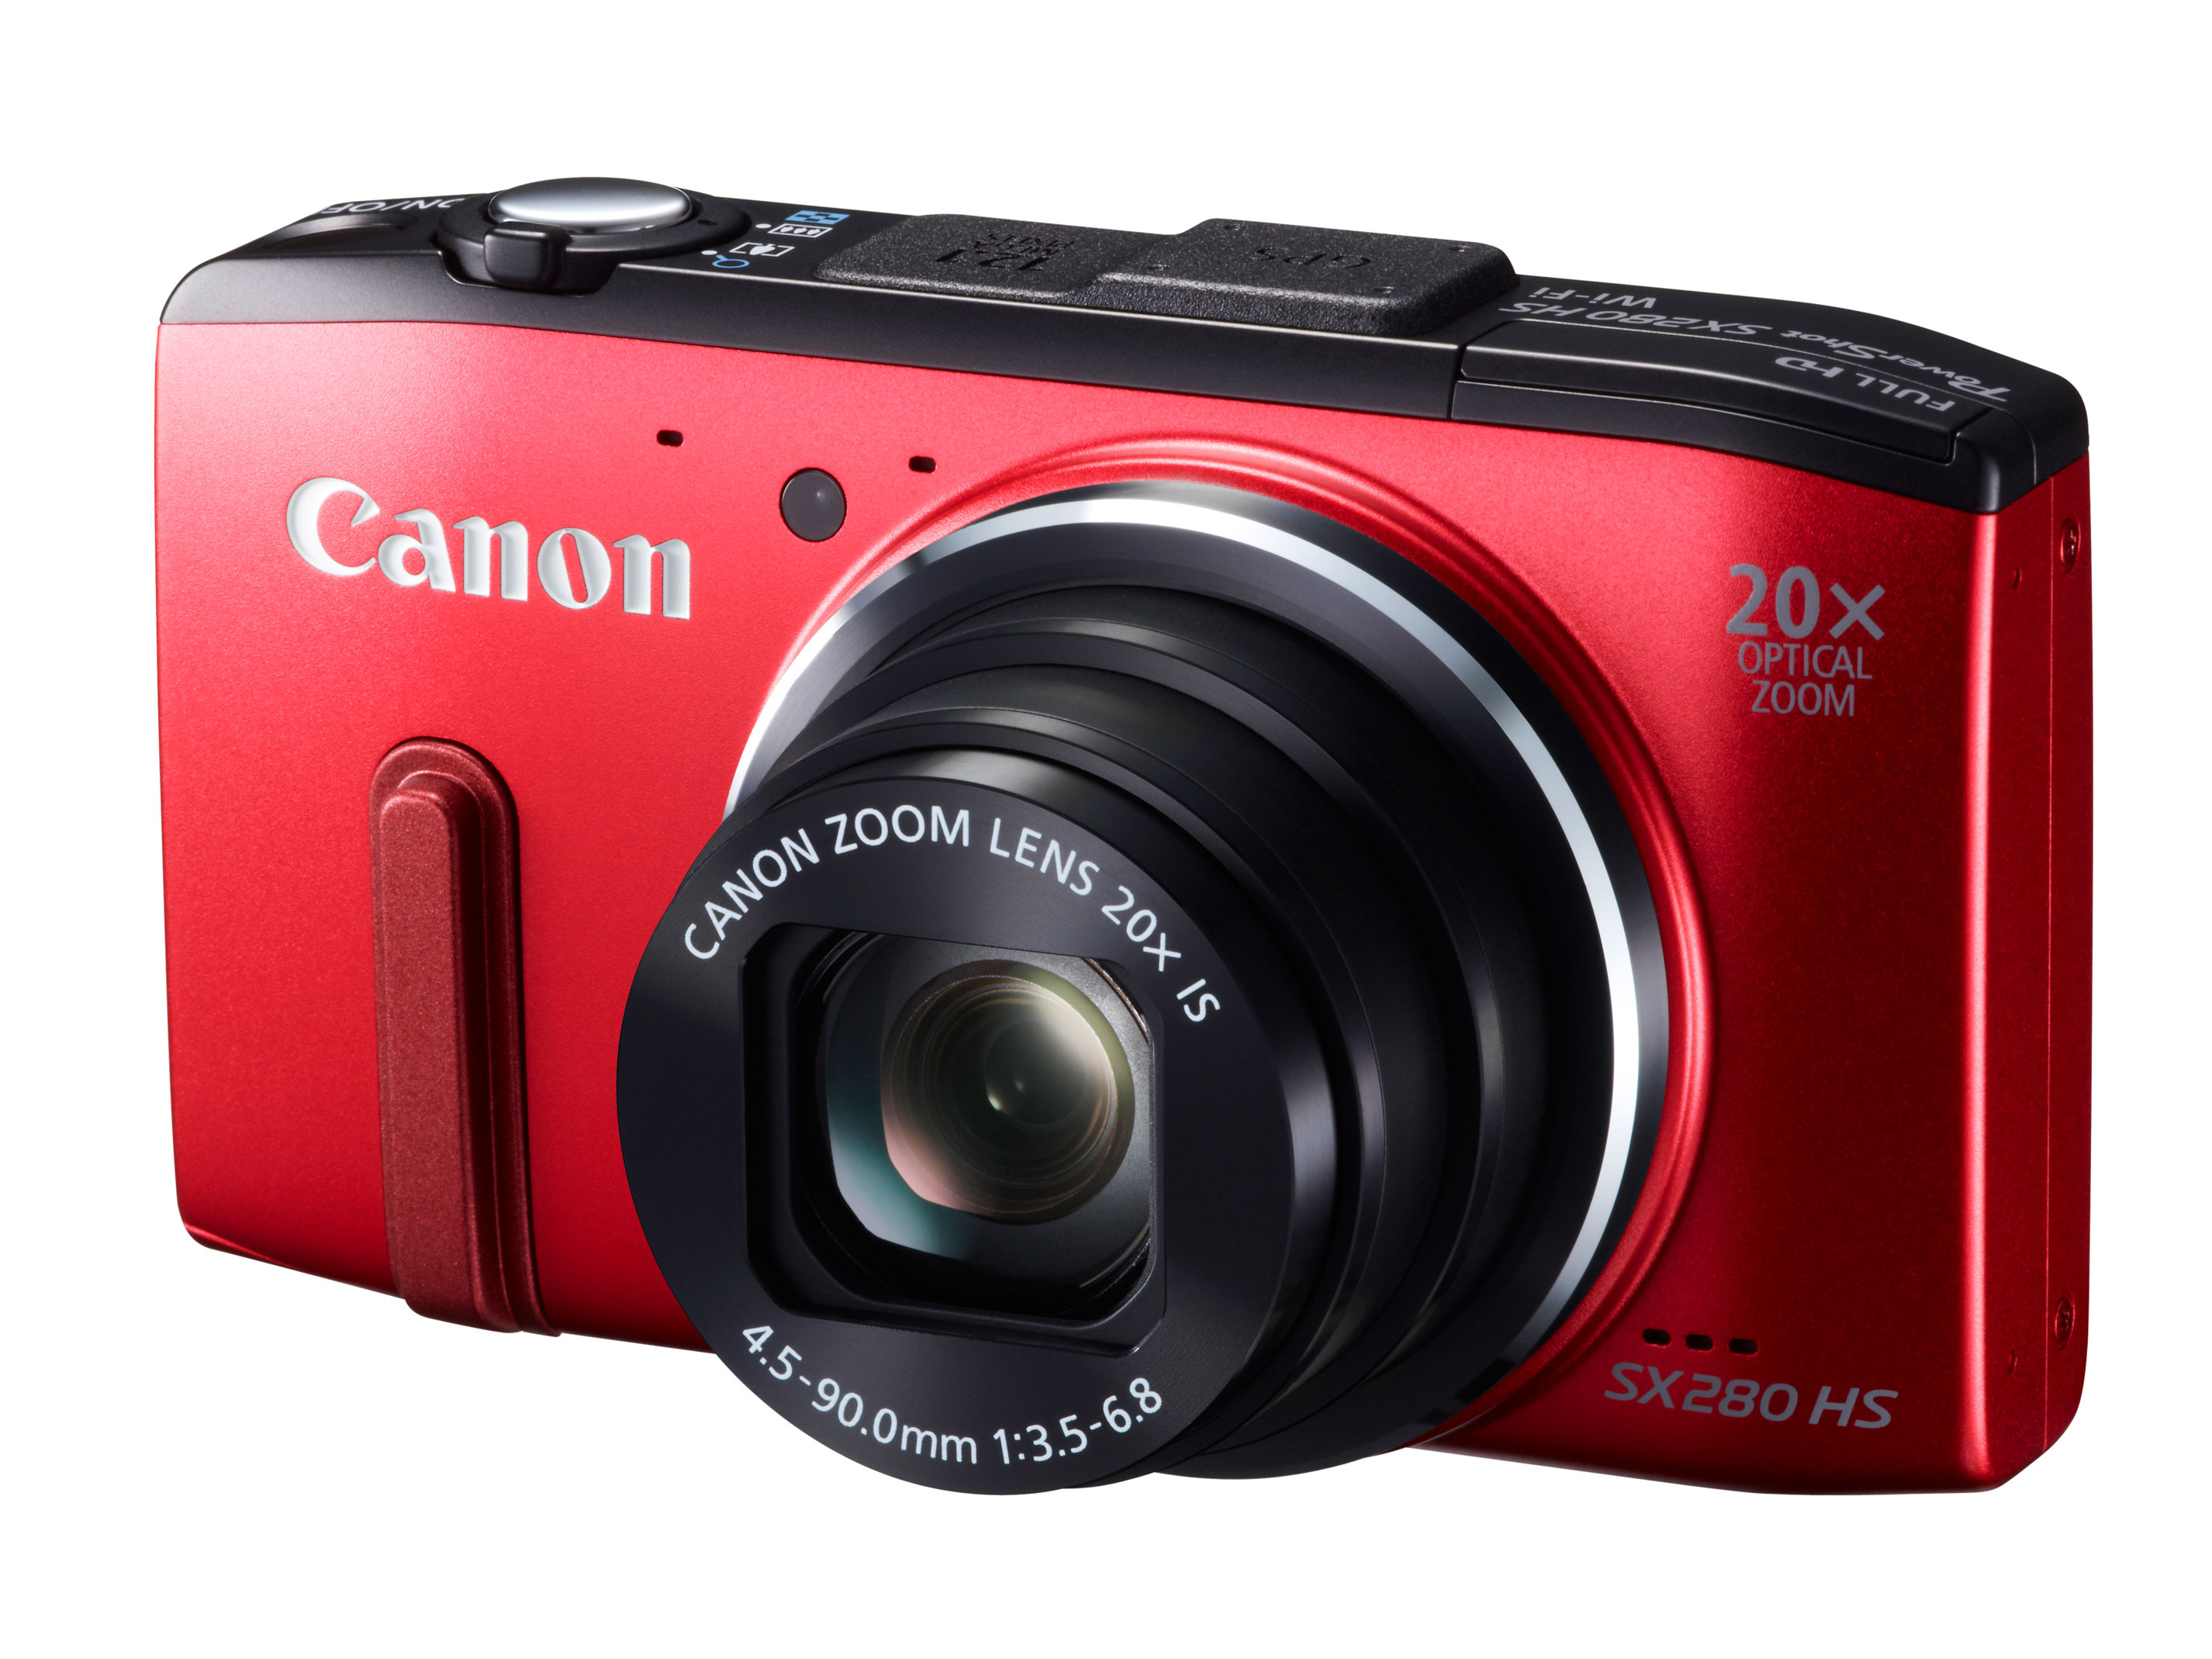 Canon PowerShot SX280 HS Price, Specs, Release Date, Where to Buy